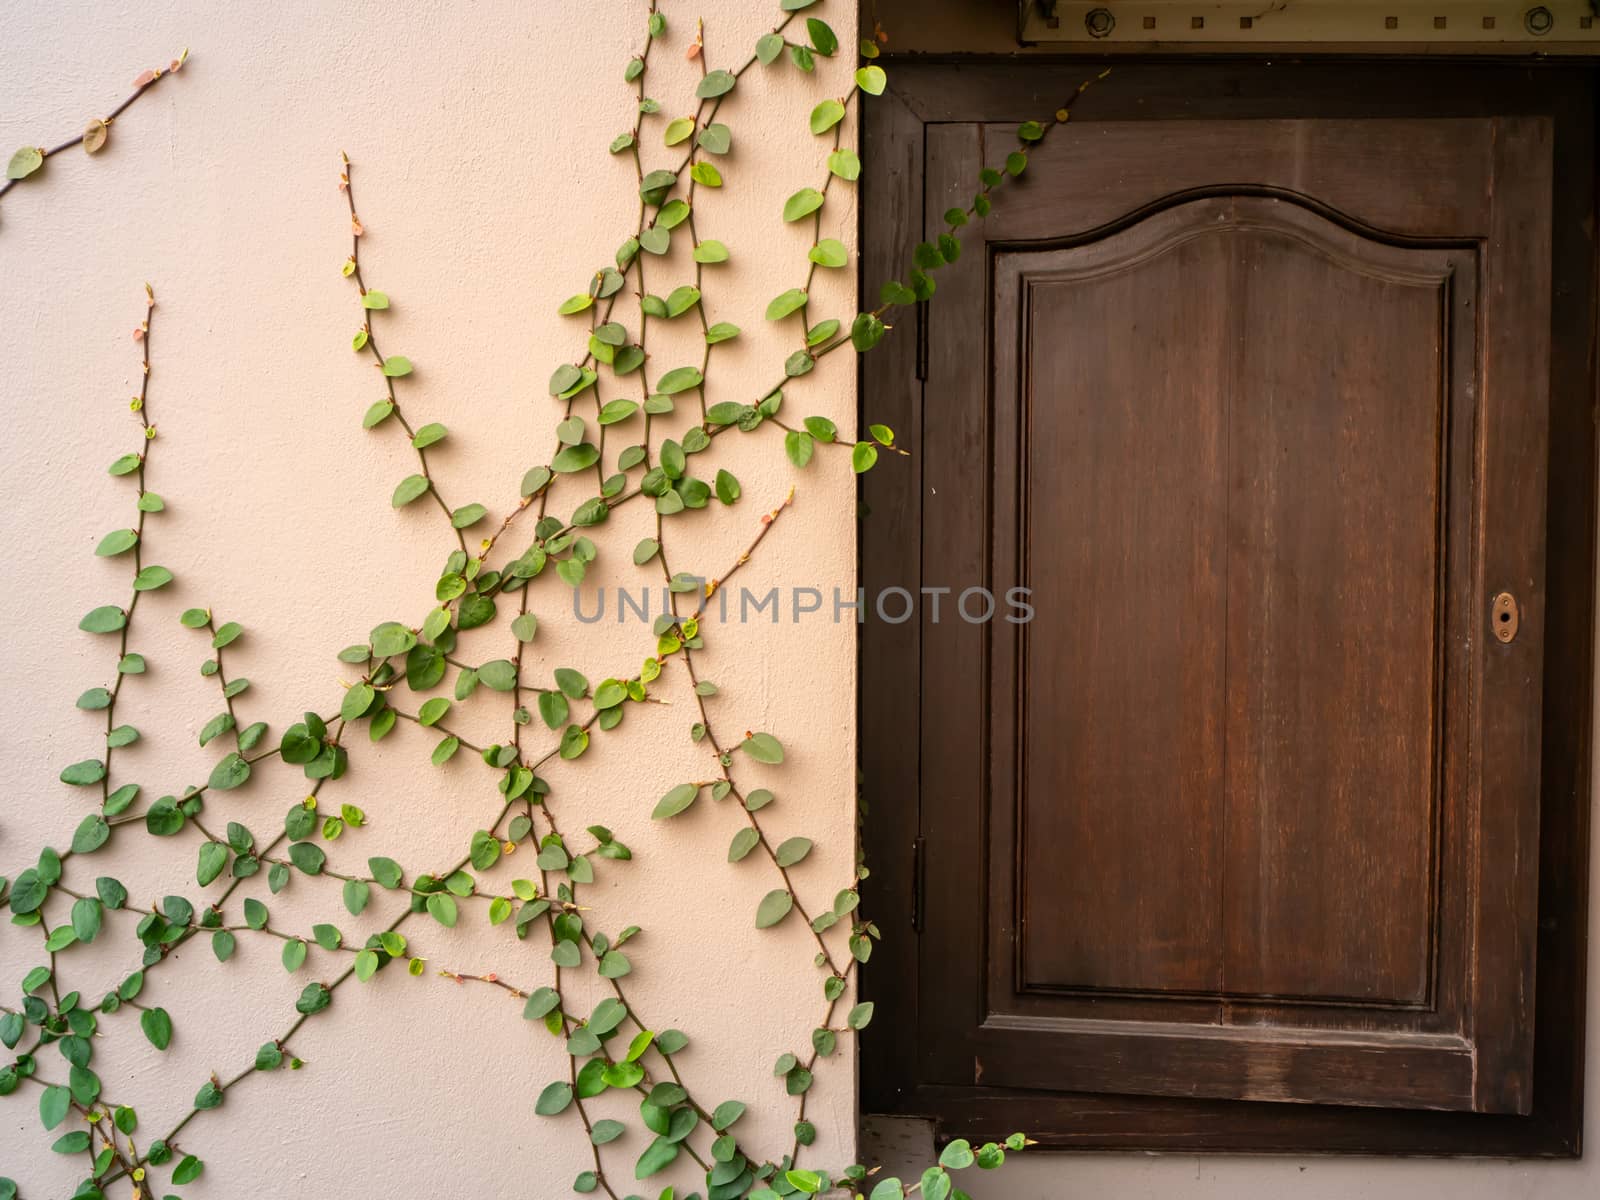 The  vine elegantly hangs, climbs, densely covers a stone, light brown wall around a wooden, brown window with bars on it